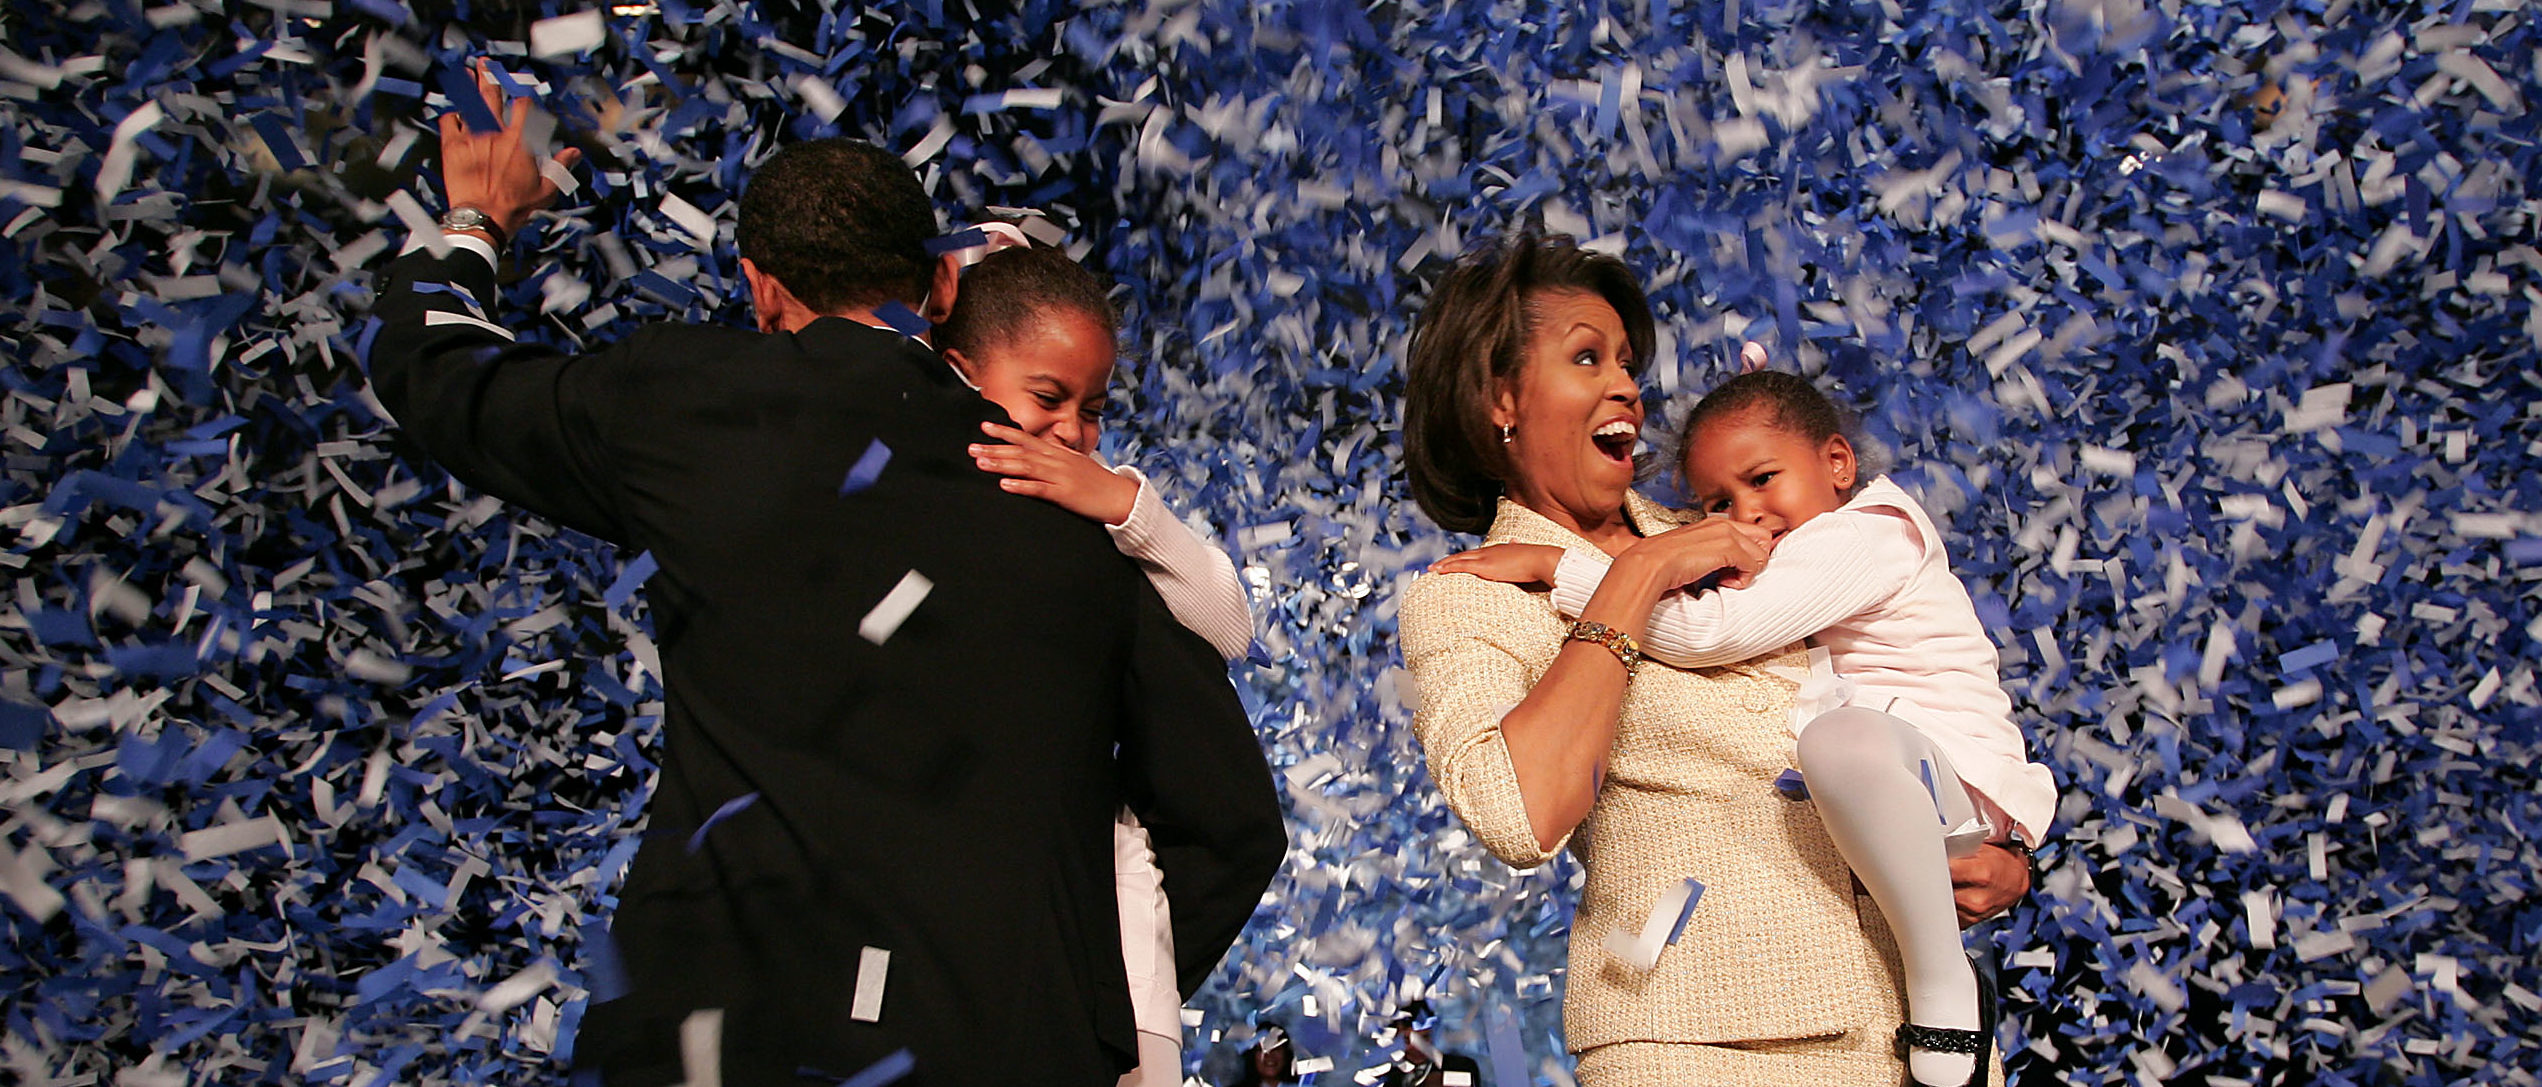 Obama Wishes Followers A Happy 4th: ‘Always A Great Day In The Obama Family’ | The ...